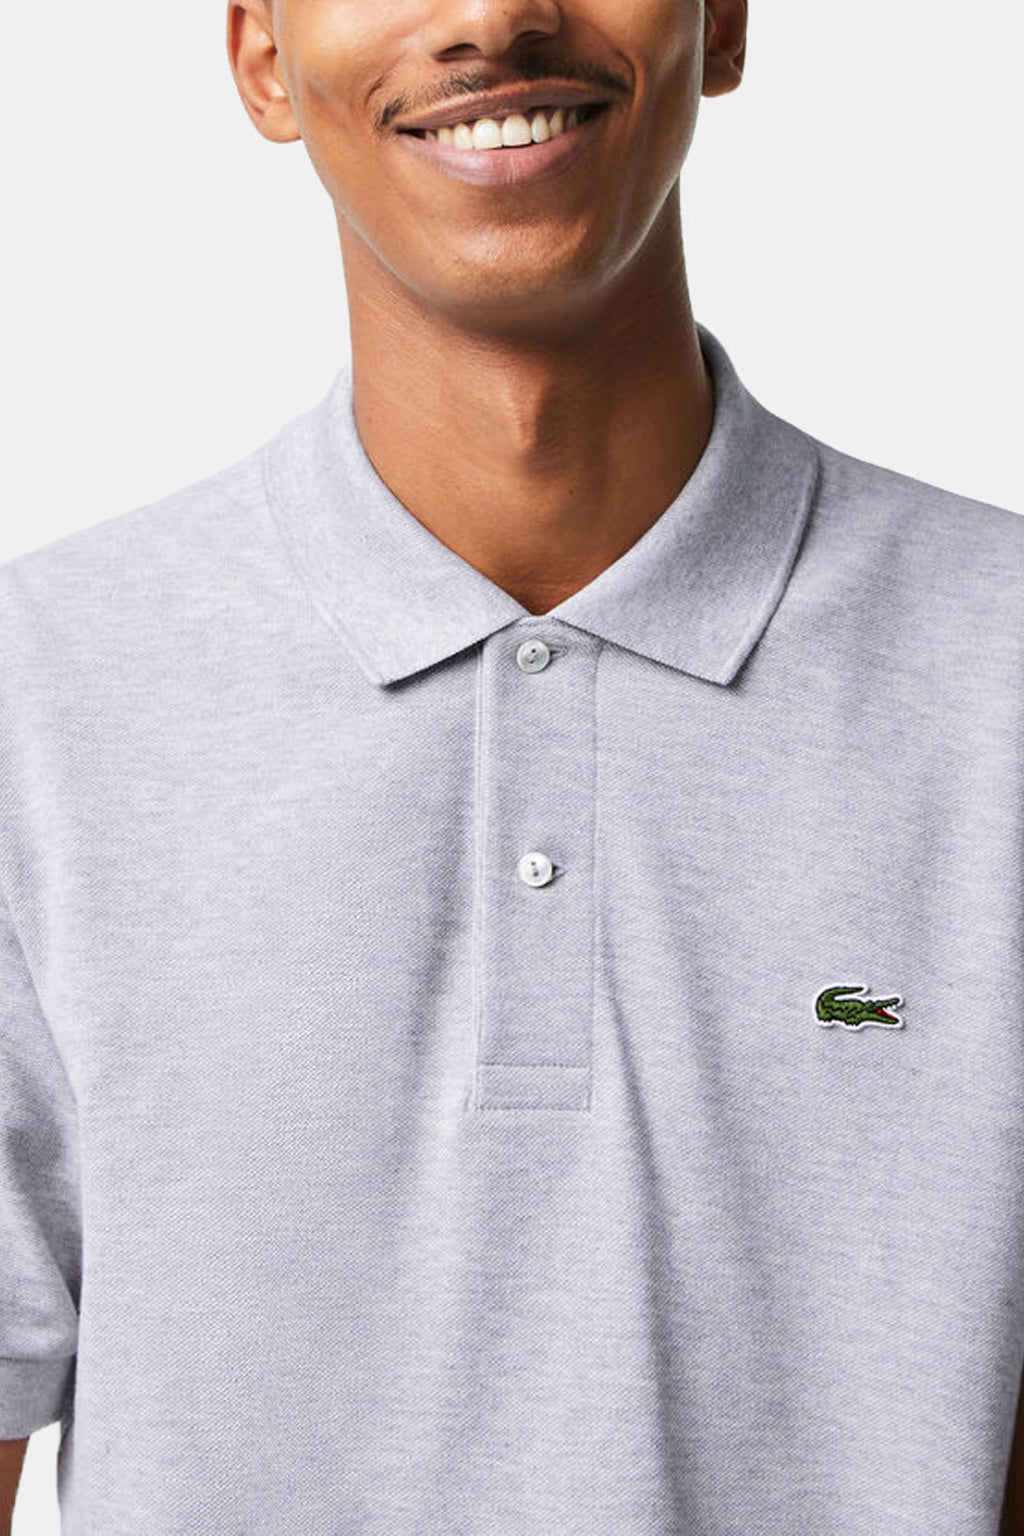 Lacoste - Marl Lacoste Classic Fit L.12.12 Polo Shirt